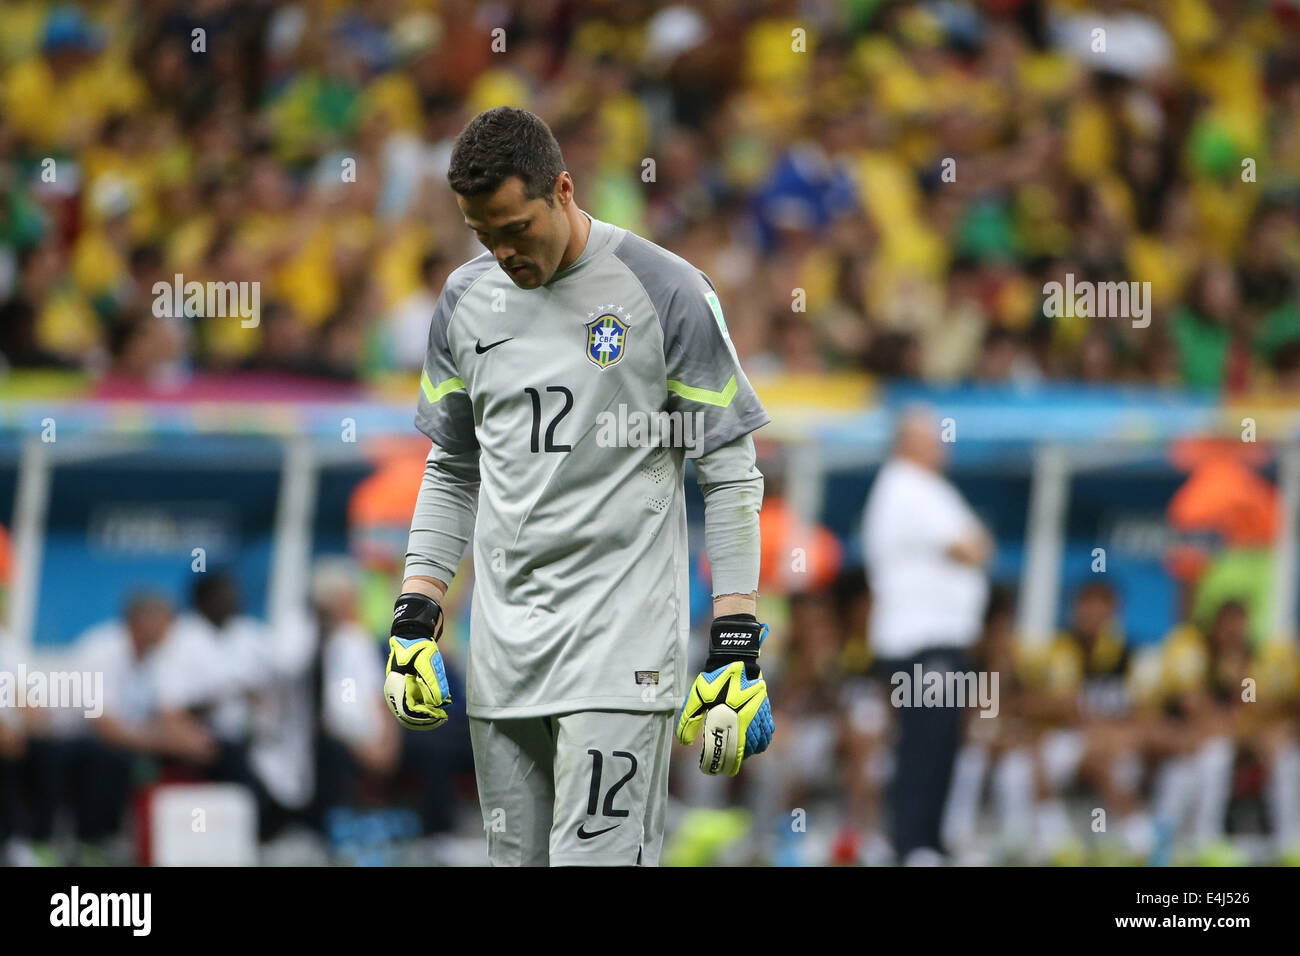 Brasilia, Brazil. 12th July, 2014. Brazil's goalkeeper Julio Cesar reacts during the third place play-off match between Brazil and Netherlands of 2014 FIFA World Cup at the Estadio Nacional Stadium in Brasilia, Brazil, on July 12, 2014. Credit:  Yang Lei/Xinhua/Alamy Live News Stock Photo